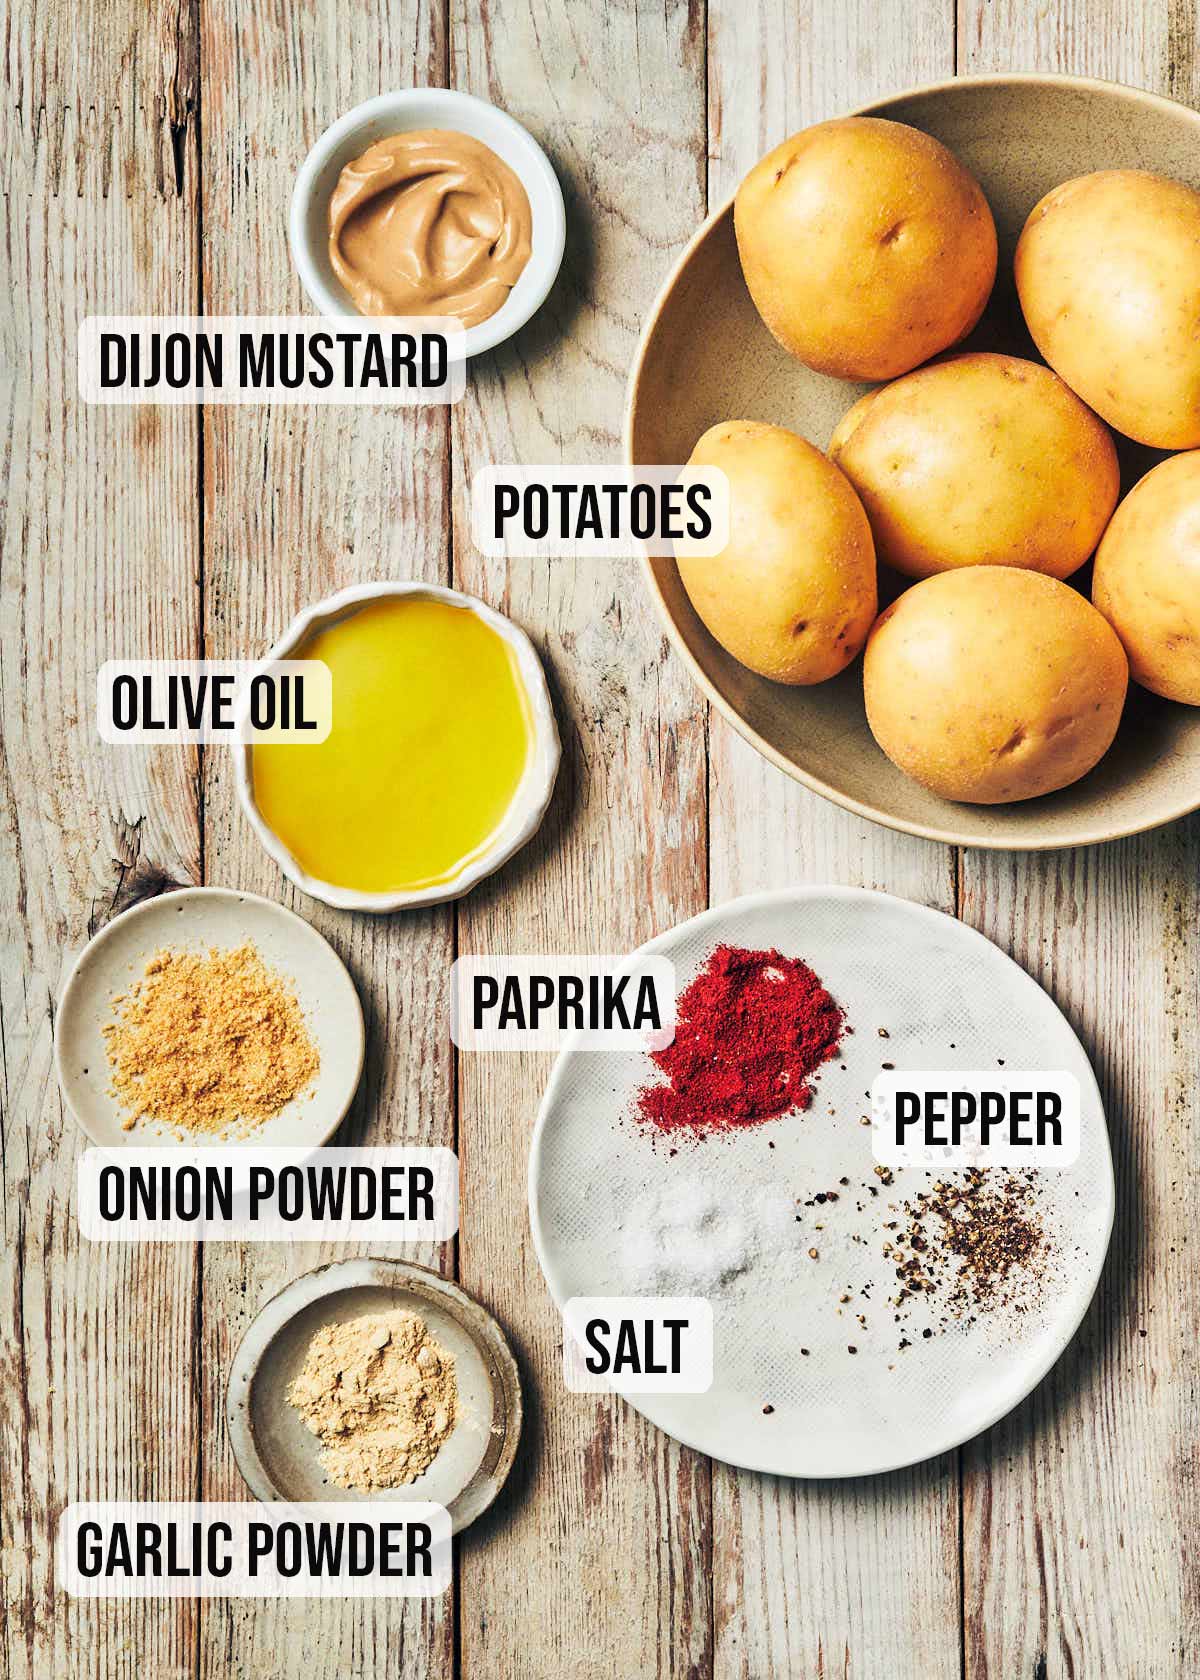 Ingredients to make air fryer breakfast potatoes (olive oil, mustard, spices, potatoes)